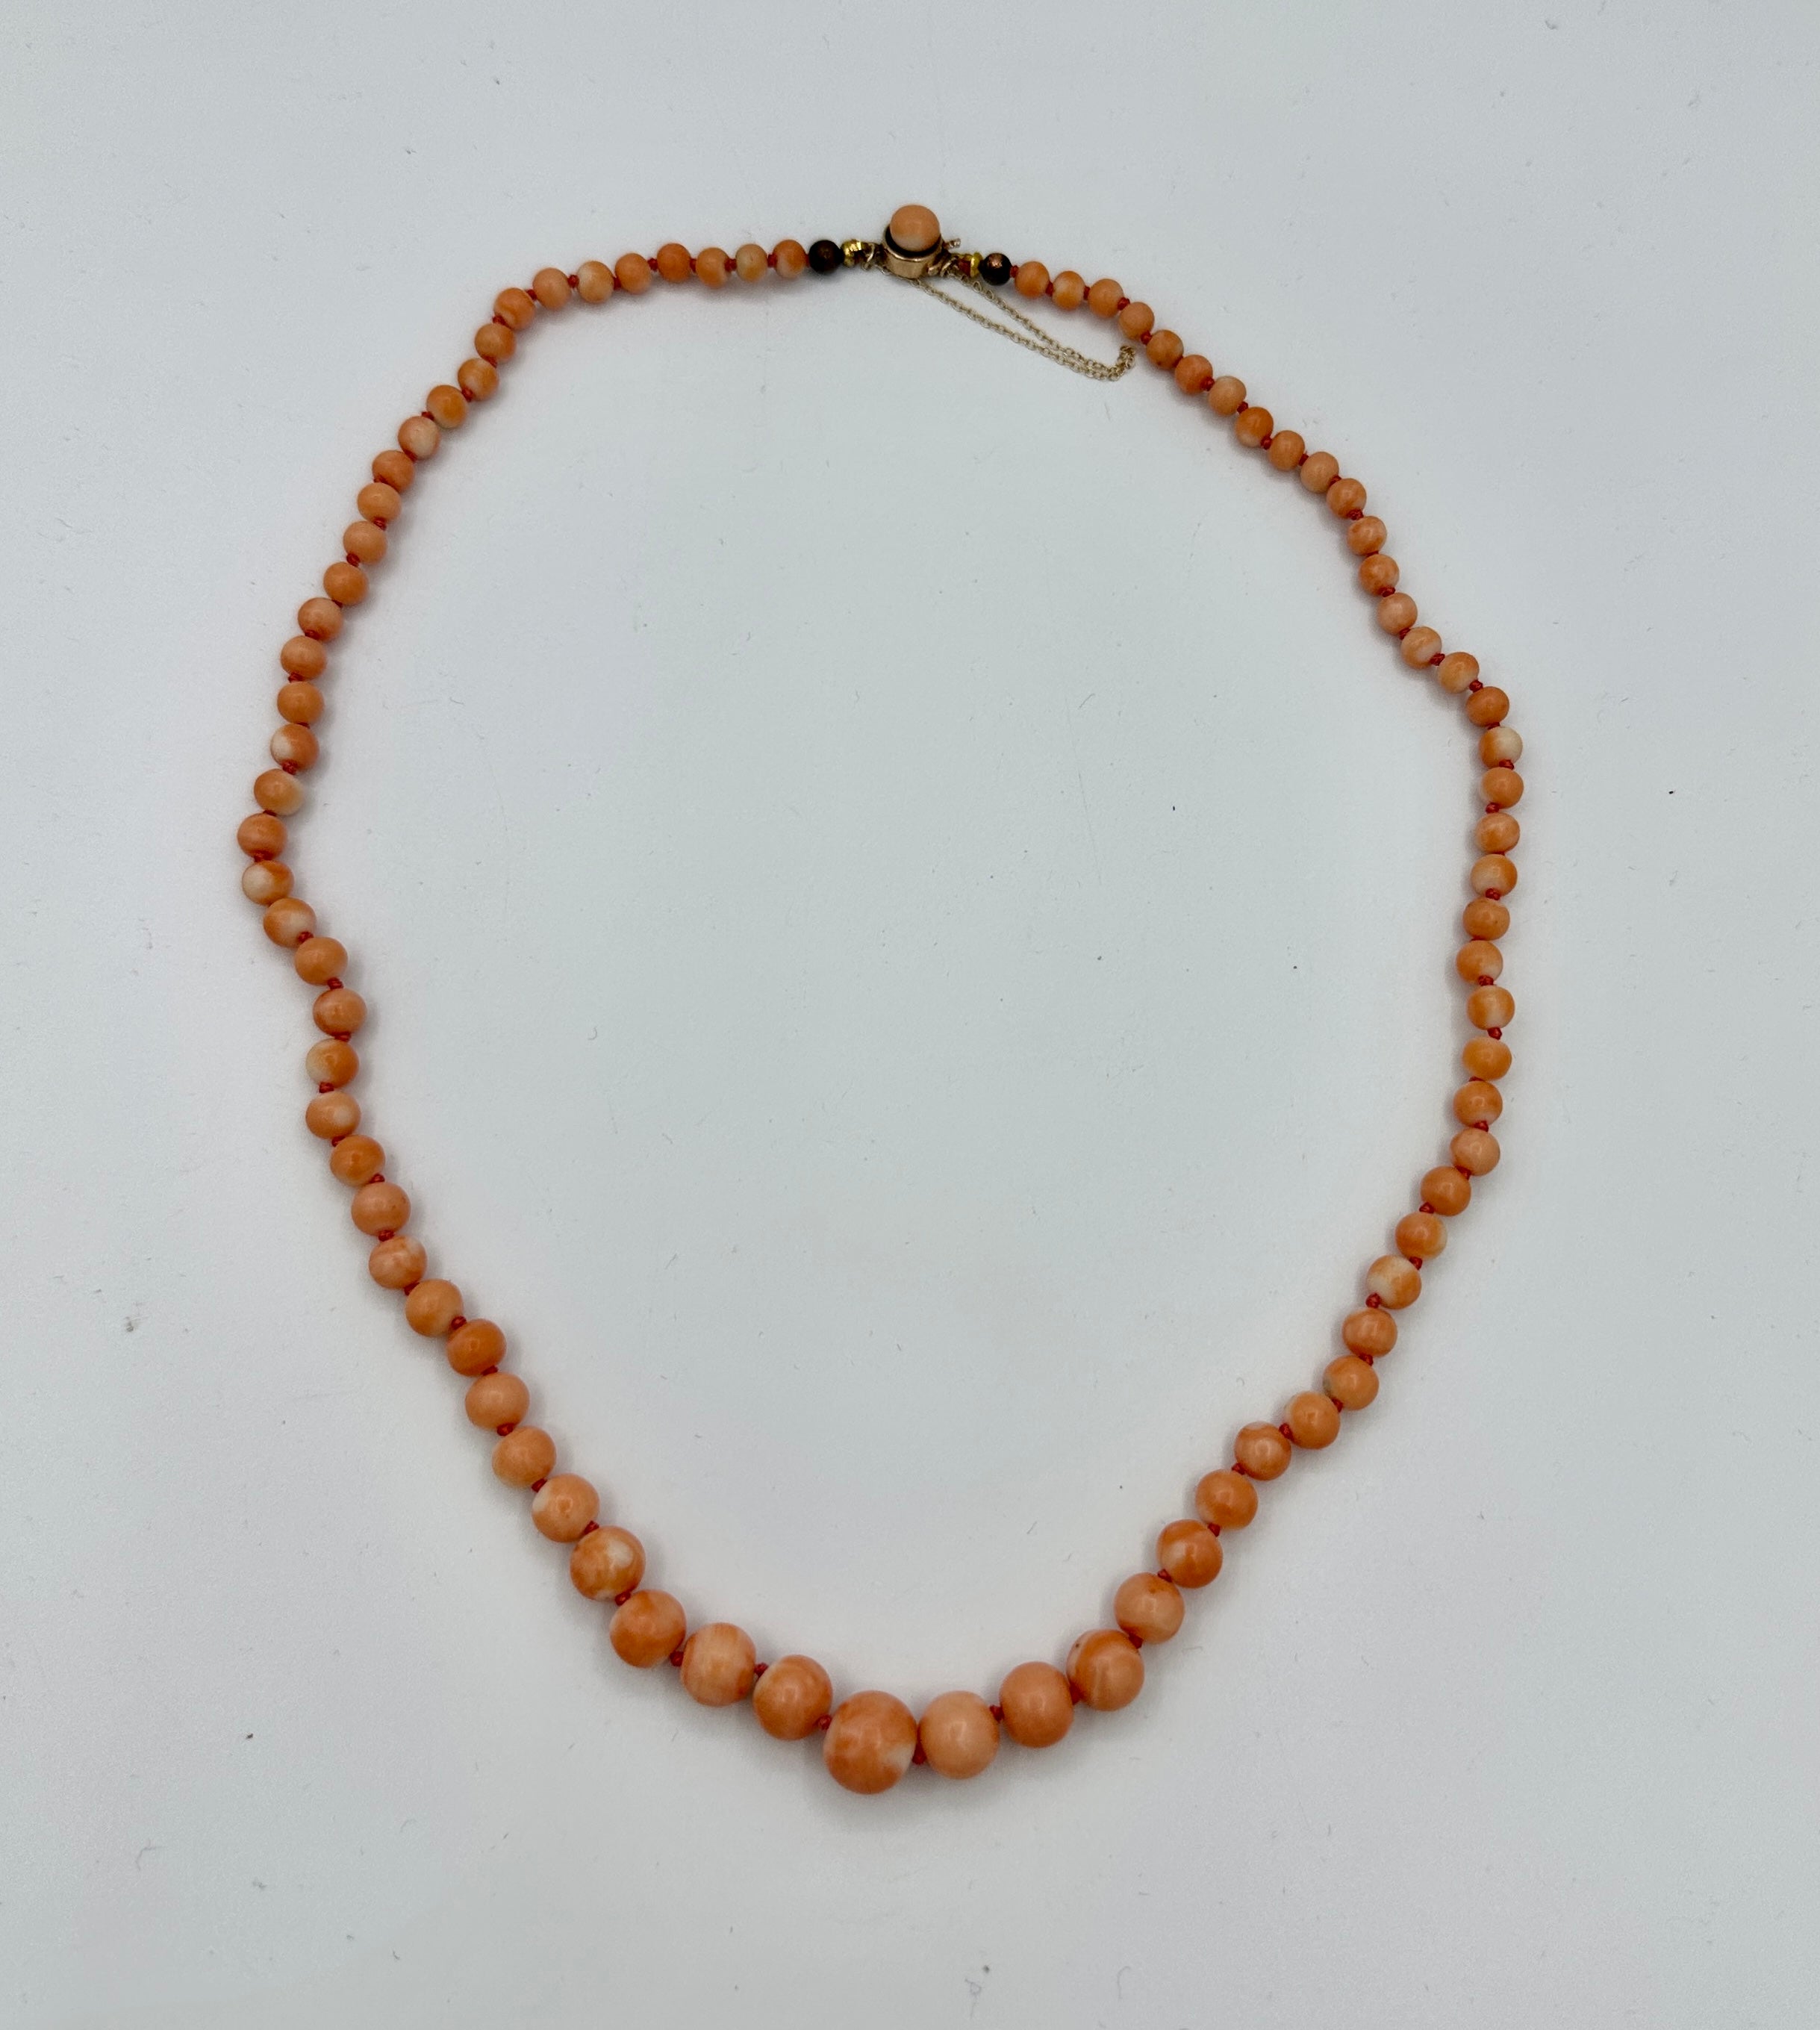 Indulge in this elegant antique Victorian - Art Deco Graduated Coral and Gold Necklace.  The magnificent Coral beads are graduated from 5mm to 10mm in diameter.  The necklace is 20 inches long.  The clasp is 10 Karat Gold with an 8mm coral bead  The